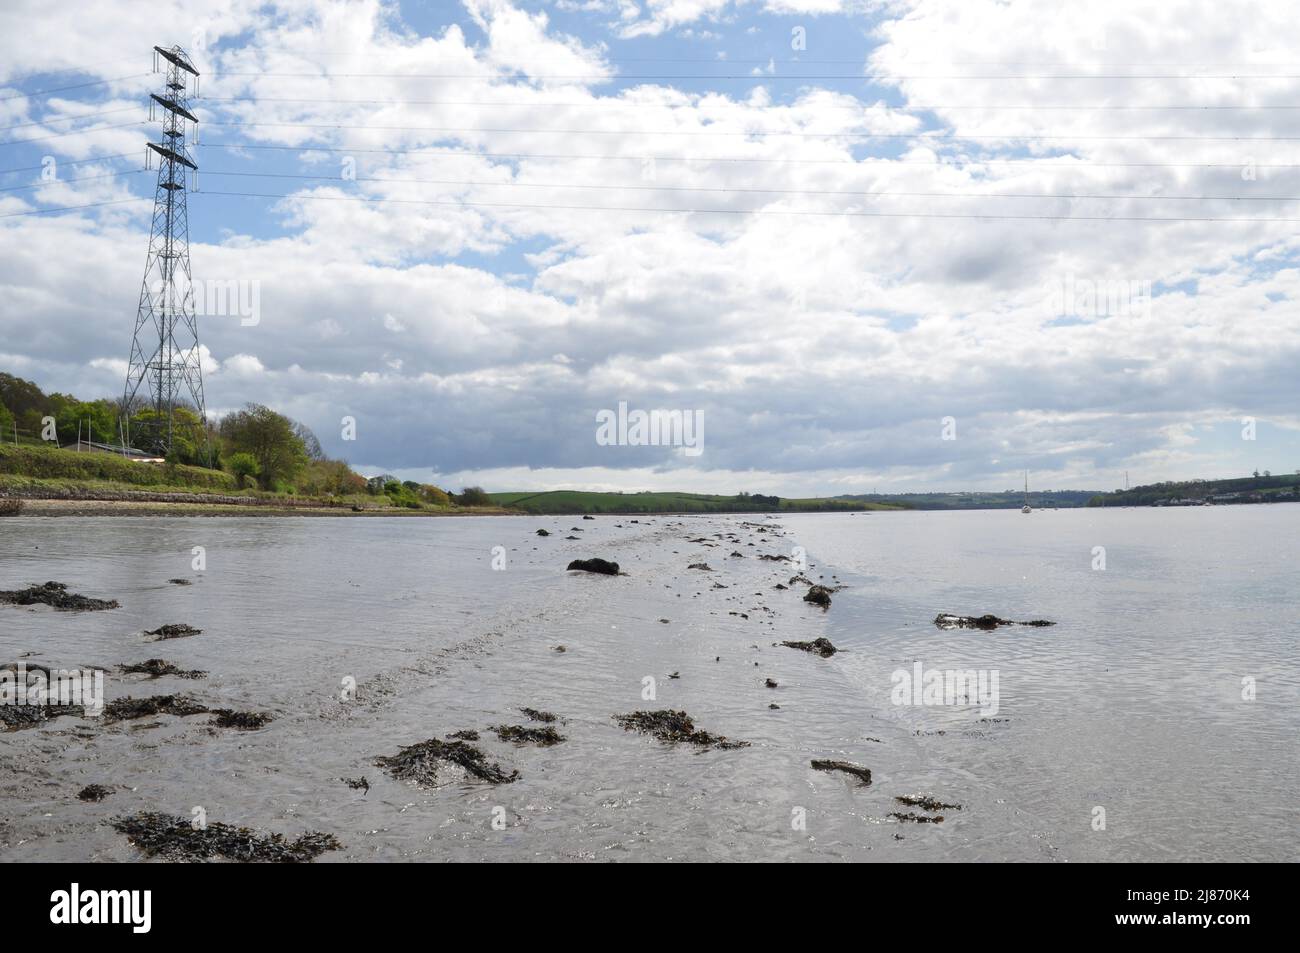 Looking south on the River Tamar at Weir Quay, Devon, England, UK. Stock Photo